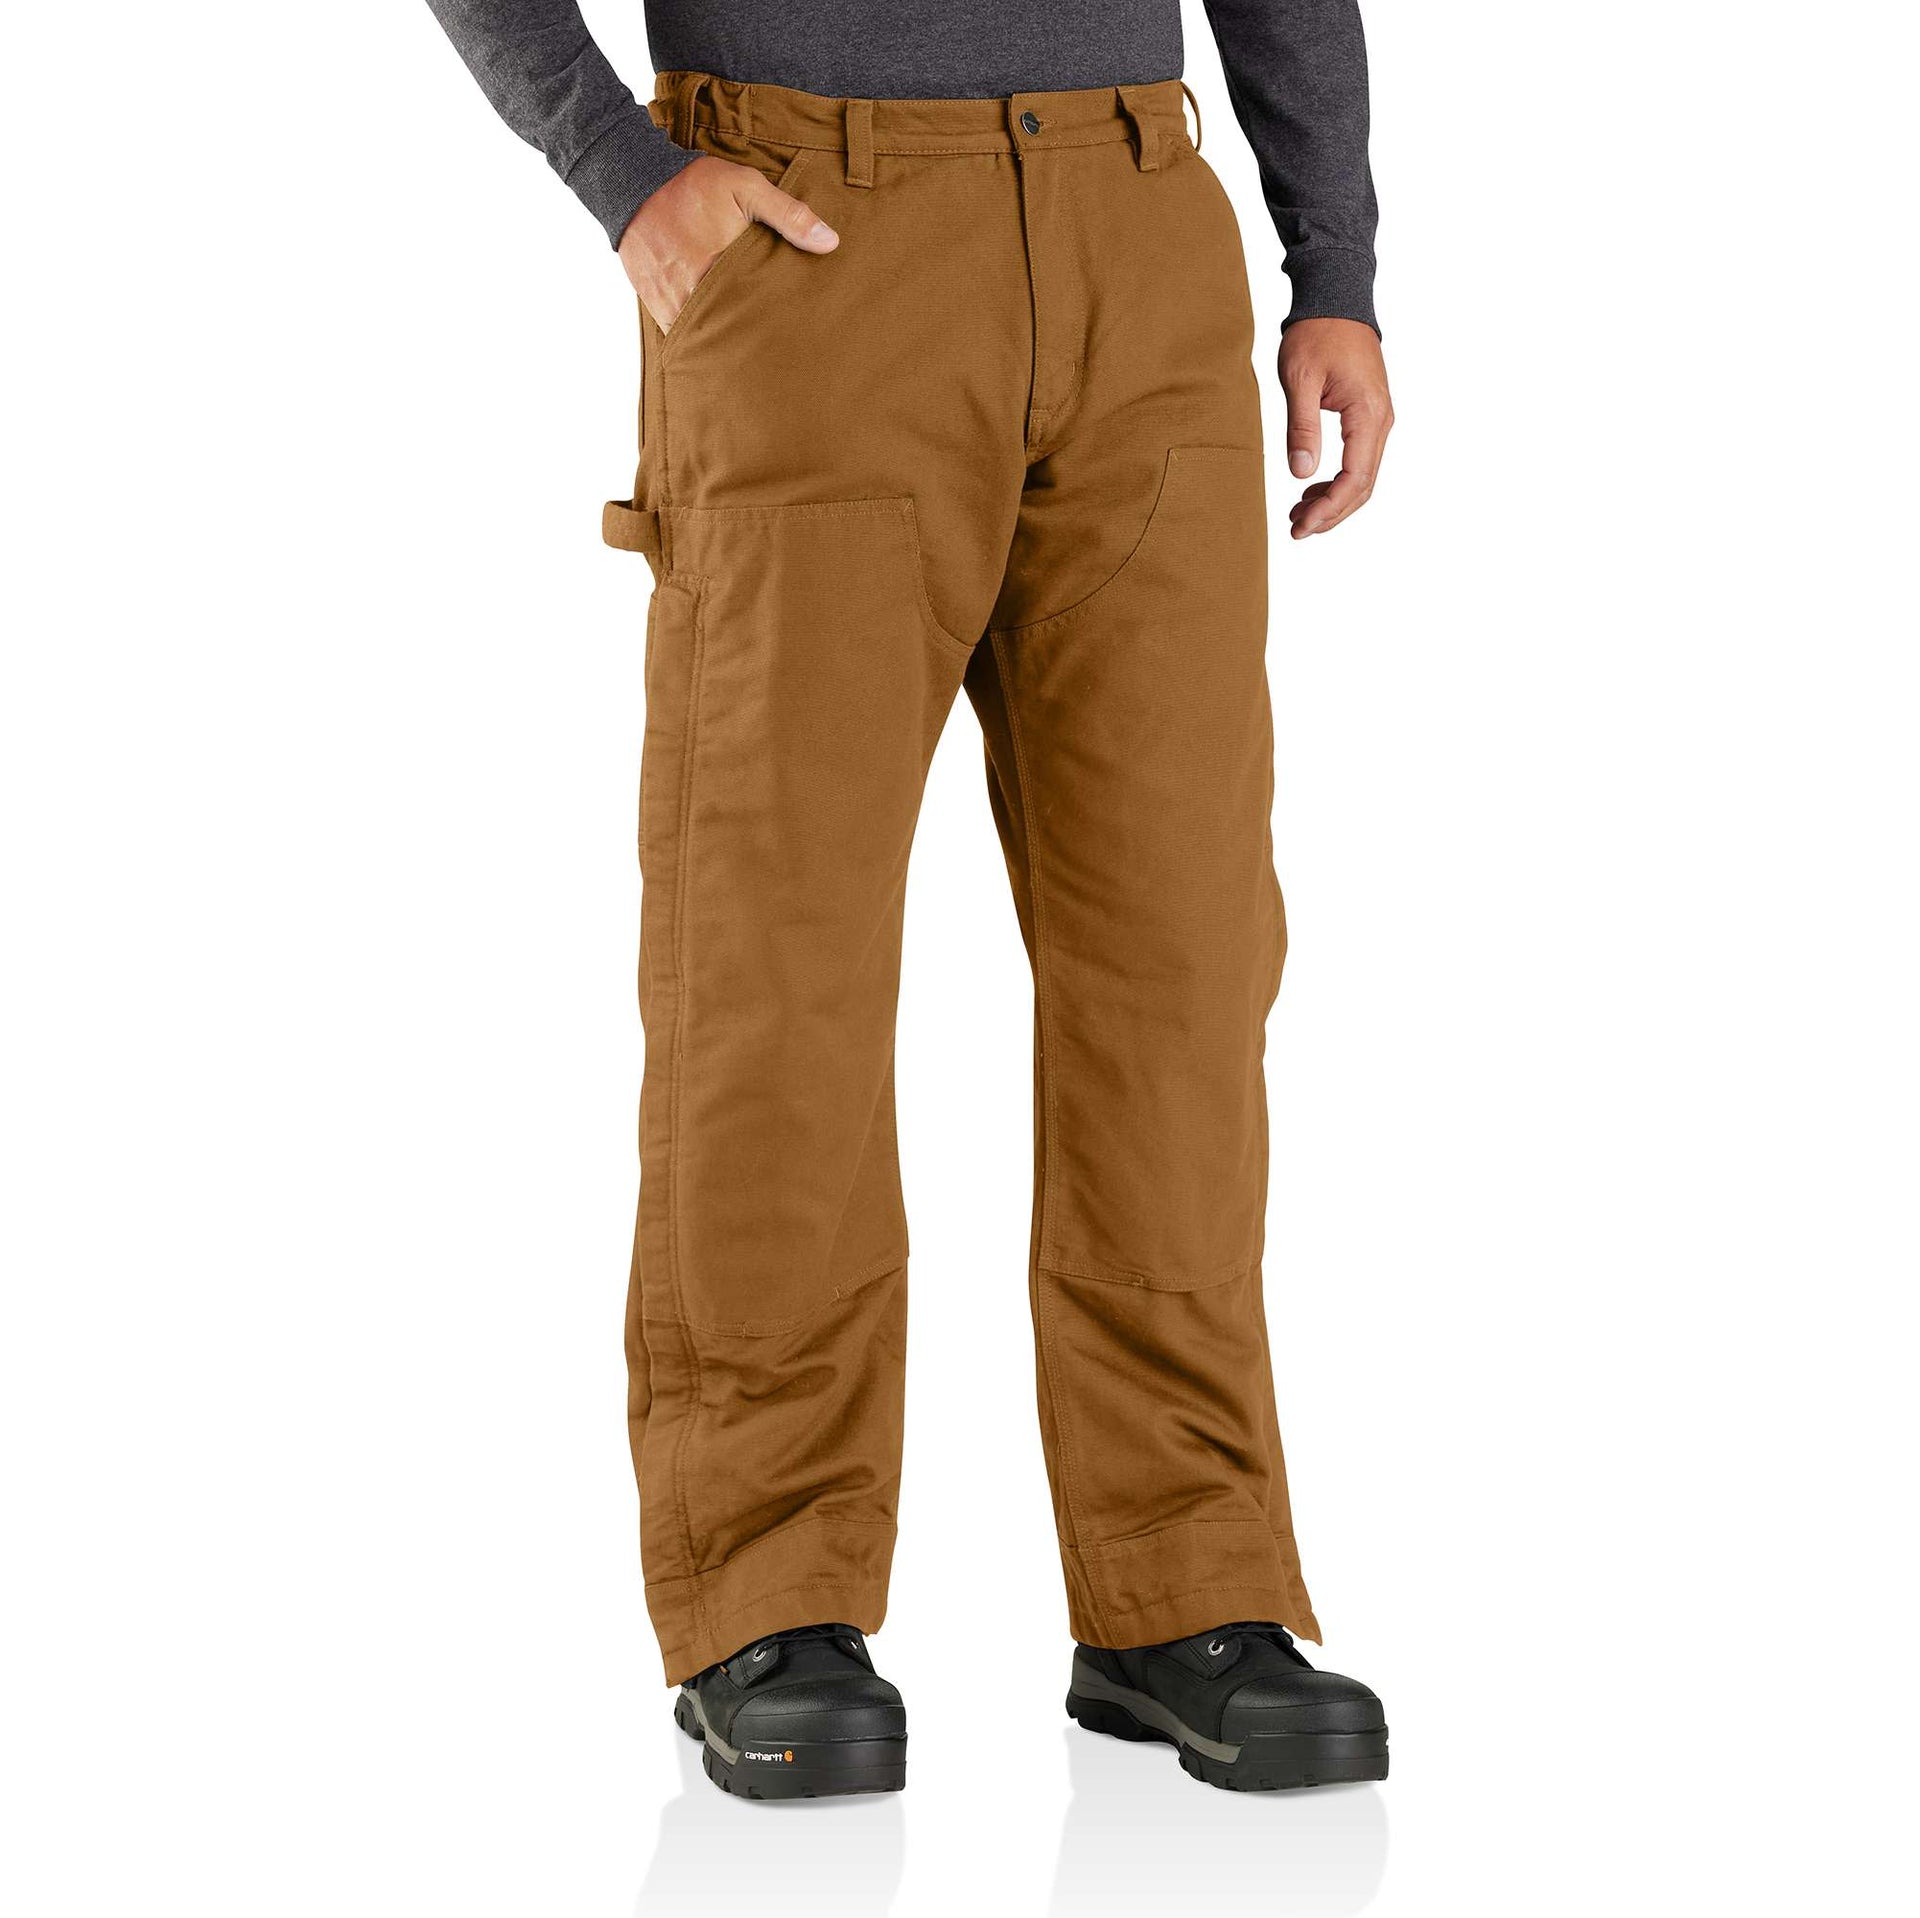 Carhartt Loose Fit Washed Duck Utility Work Pant at Hilton's Tent City in  Cambridge MA